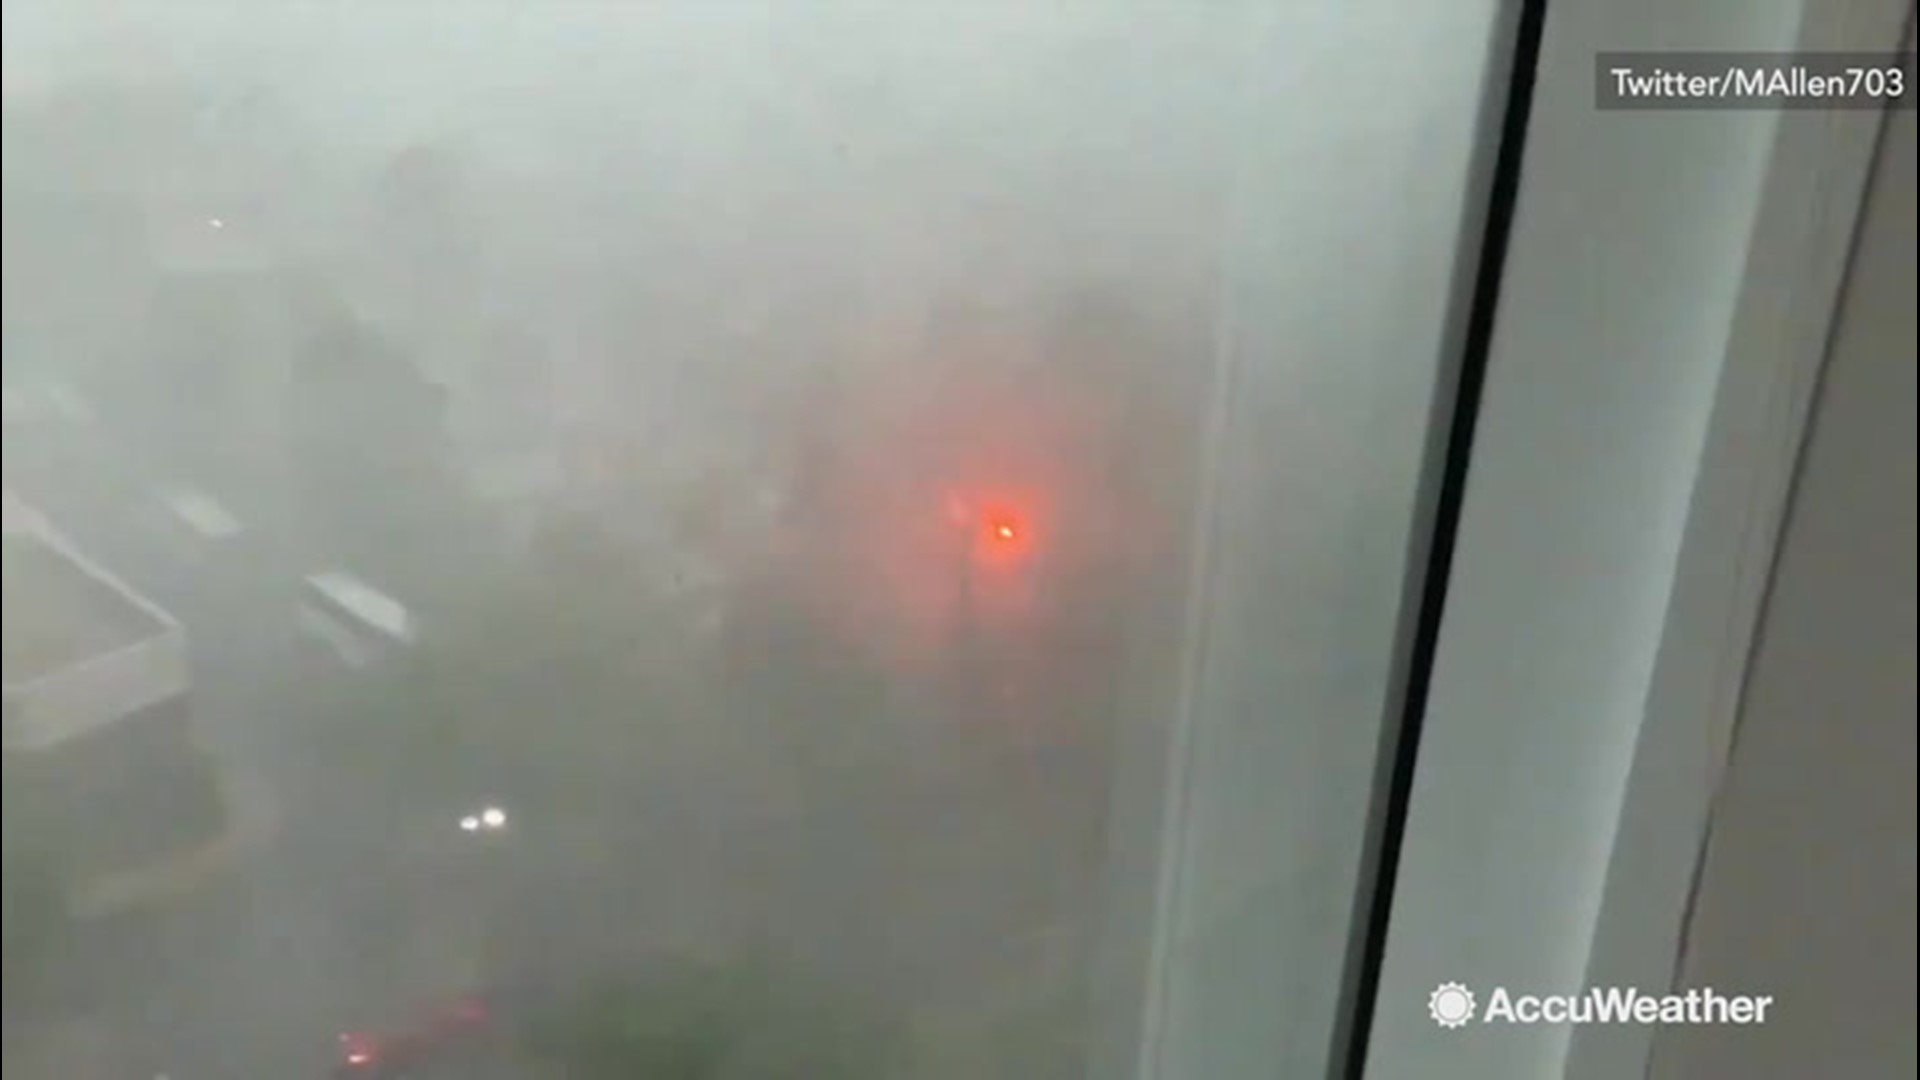 A storm in Arlington, Virginia caused a transformer to explode on May 23.